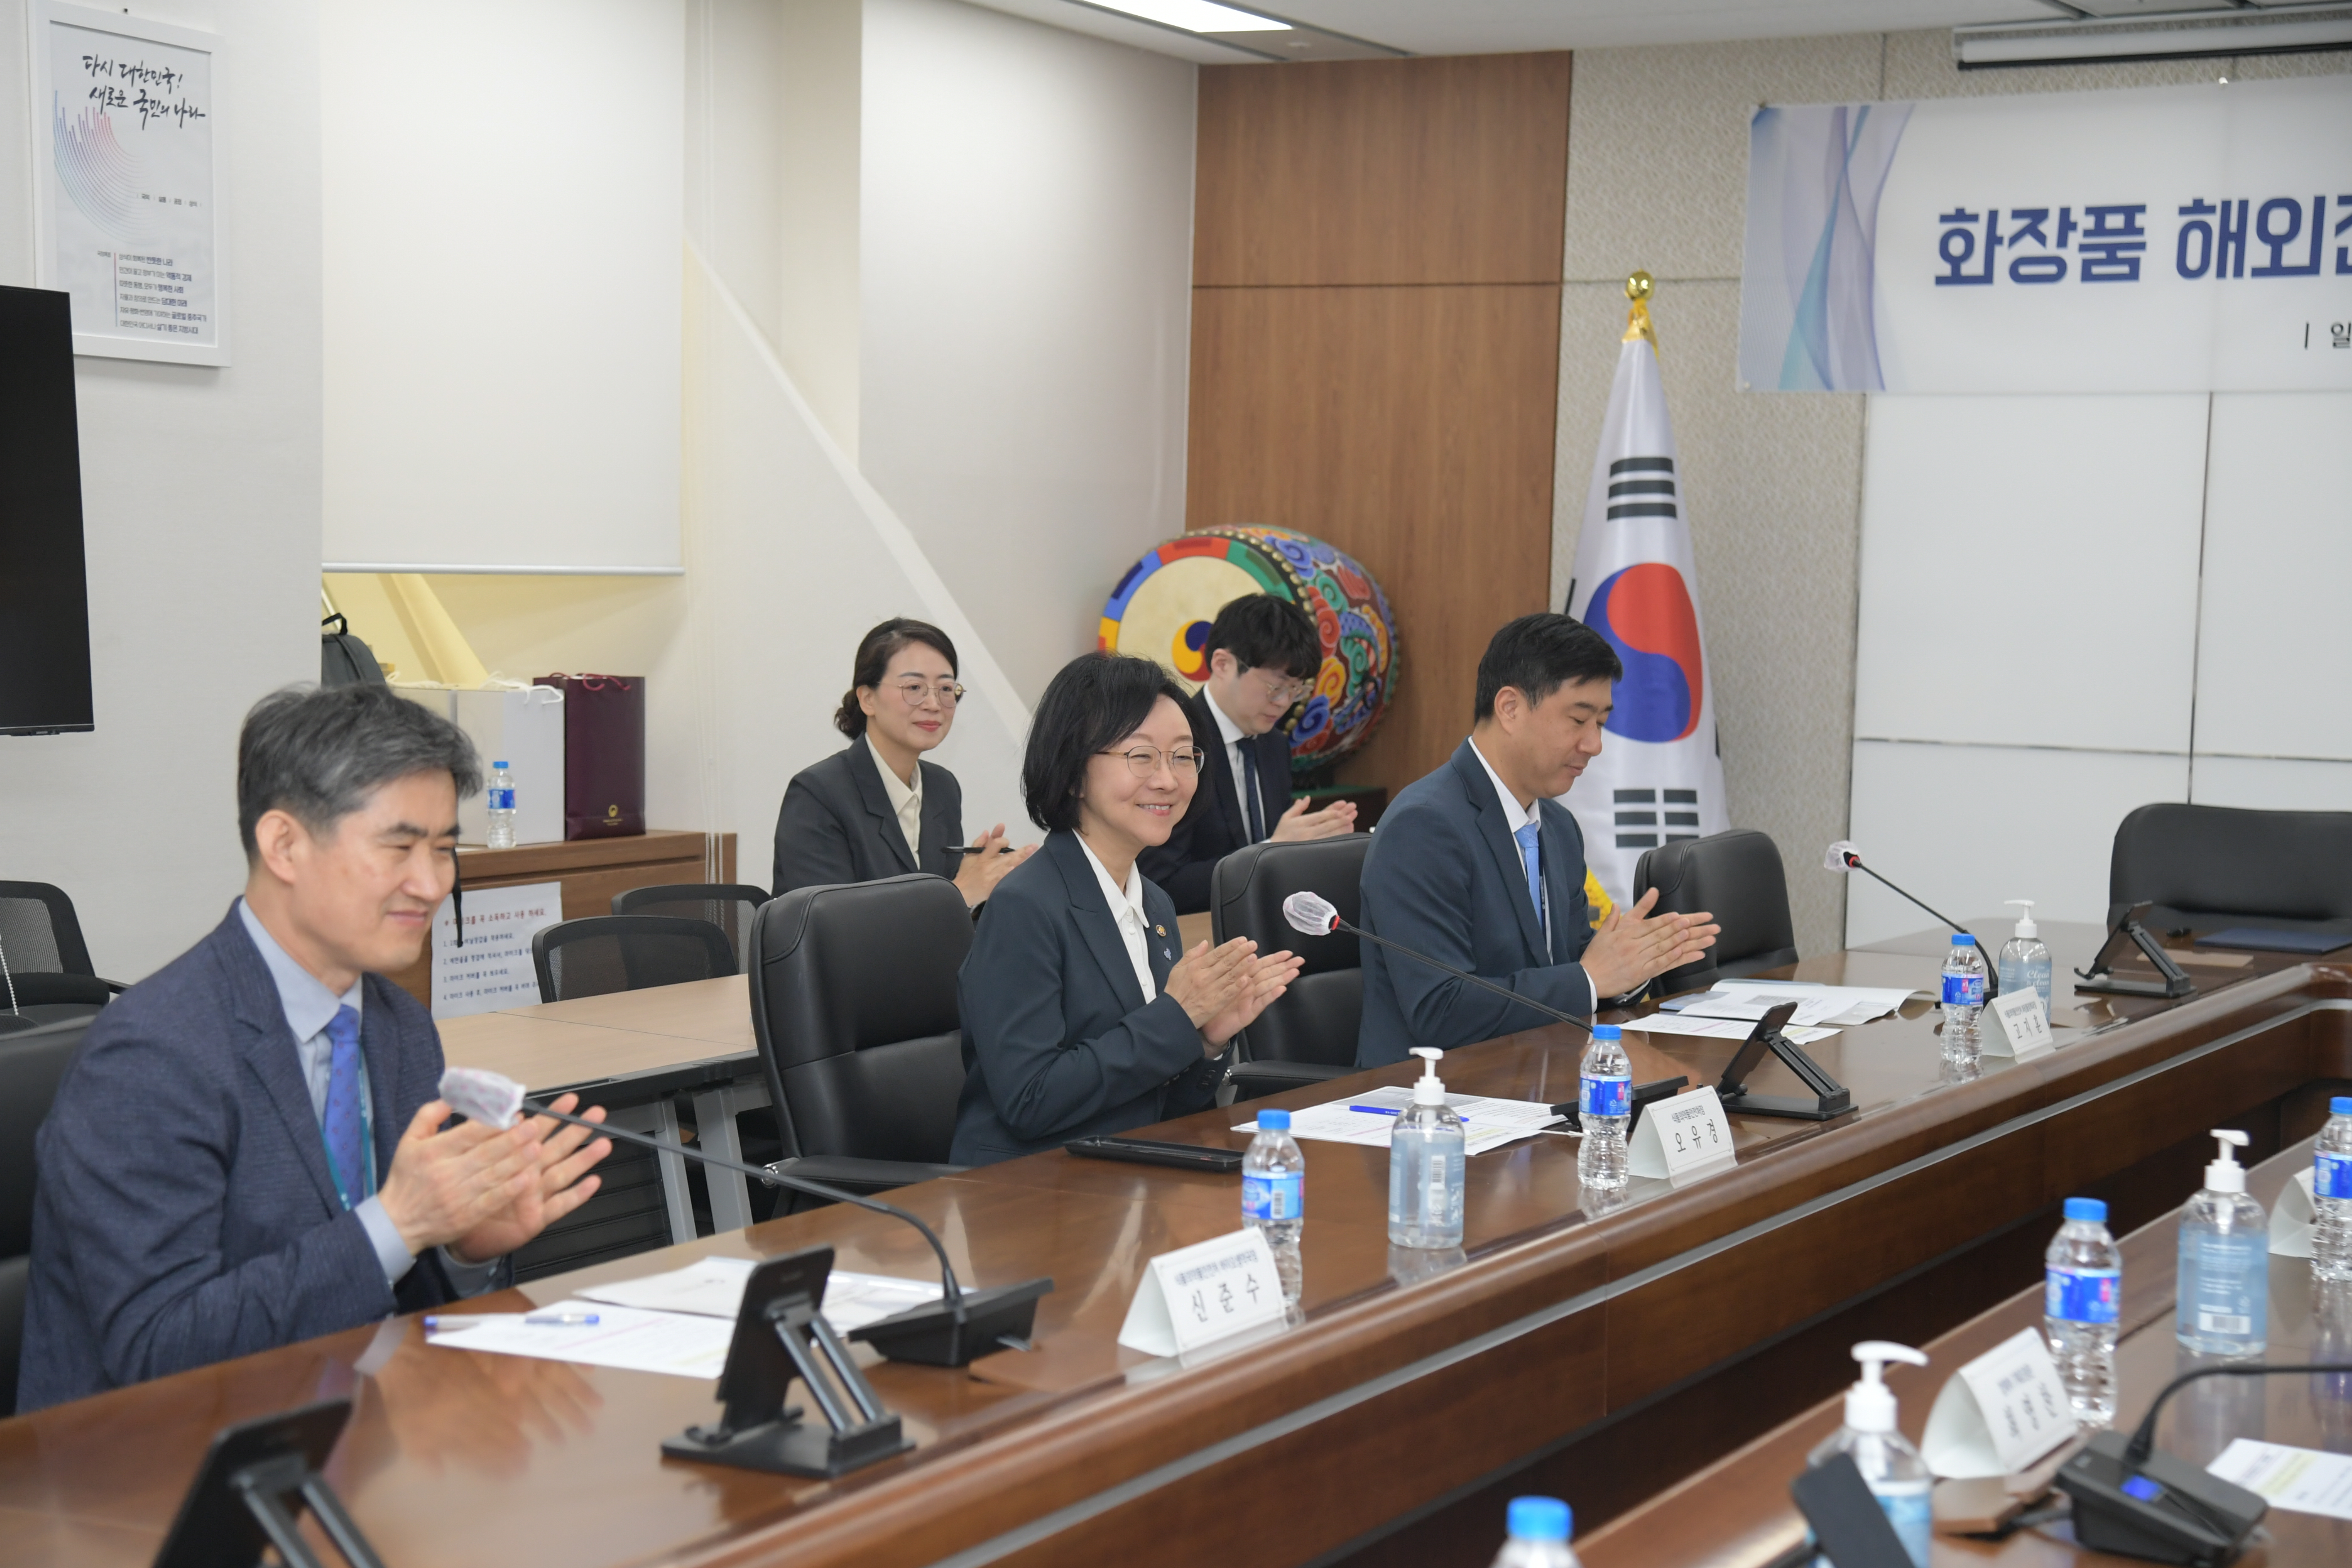 Photo News2 - Ministry of Food and Drug Safety and Ministry of Government Legislation, signing ceremony for ‘Agreement to provide legal information for overseas expansion of cosmetics’